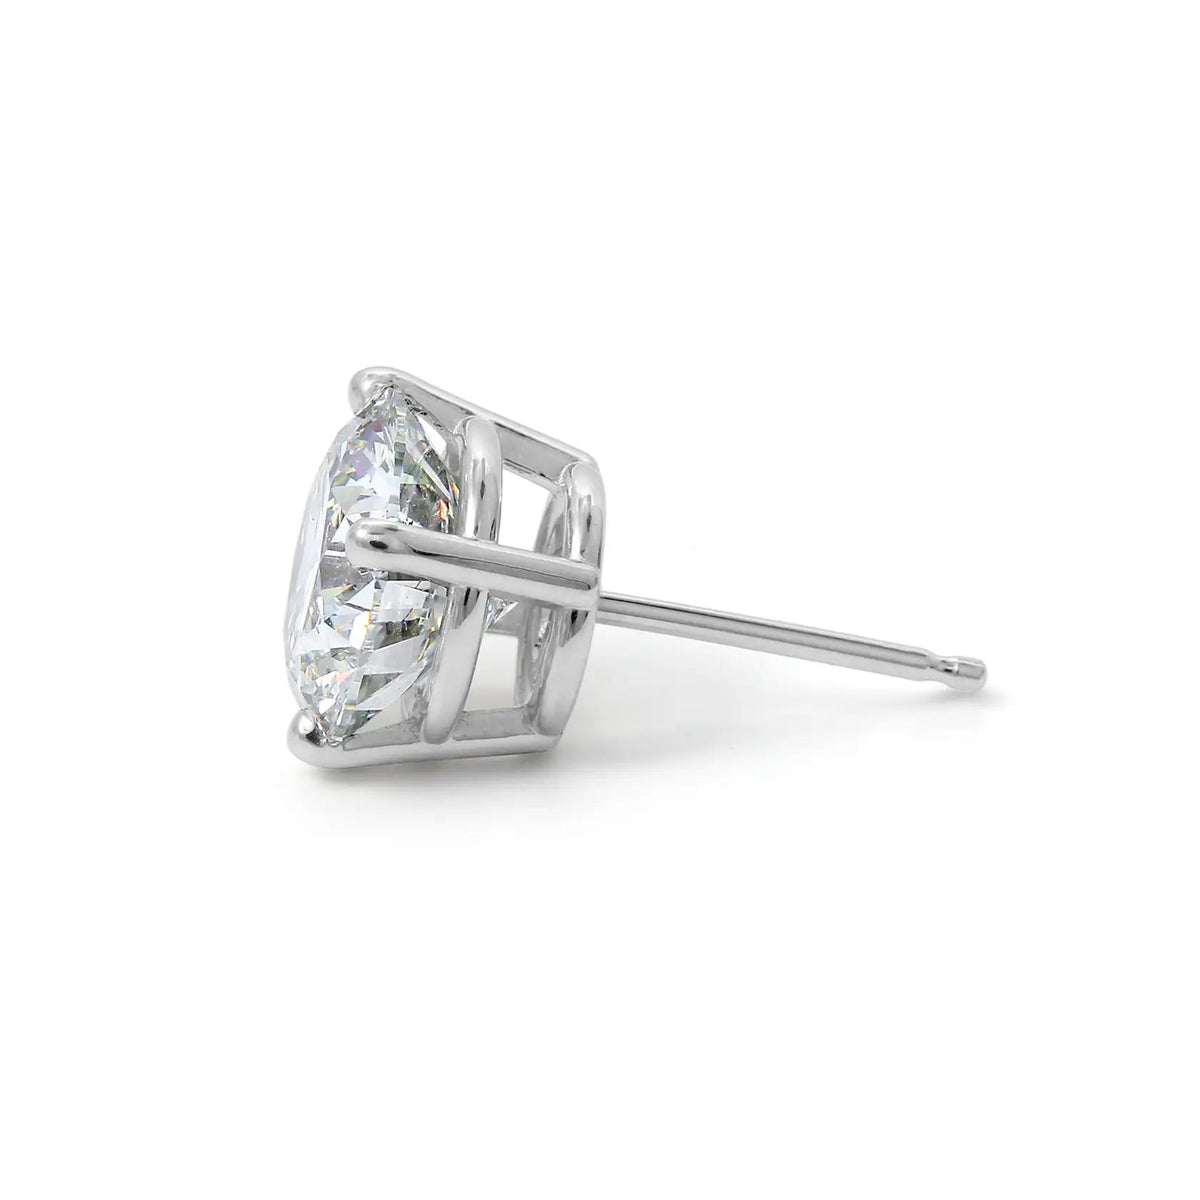 18ct 4 Claw White Gold Certified Diamond Stud Earrings 4.02ct